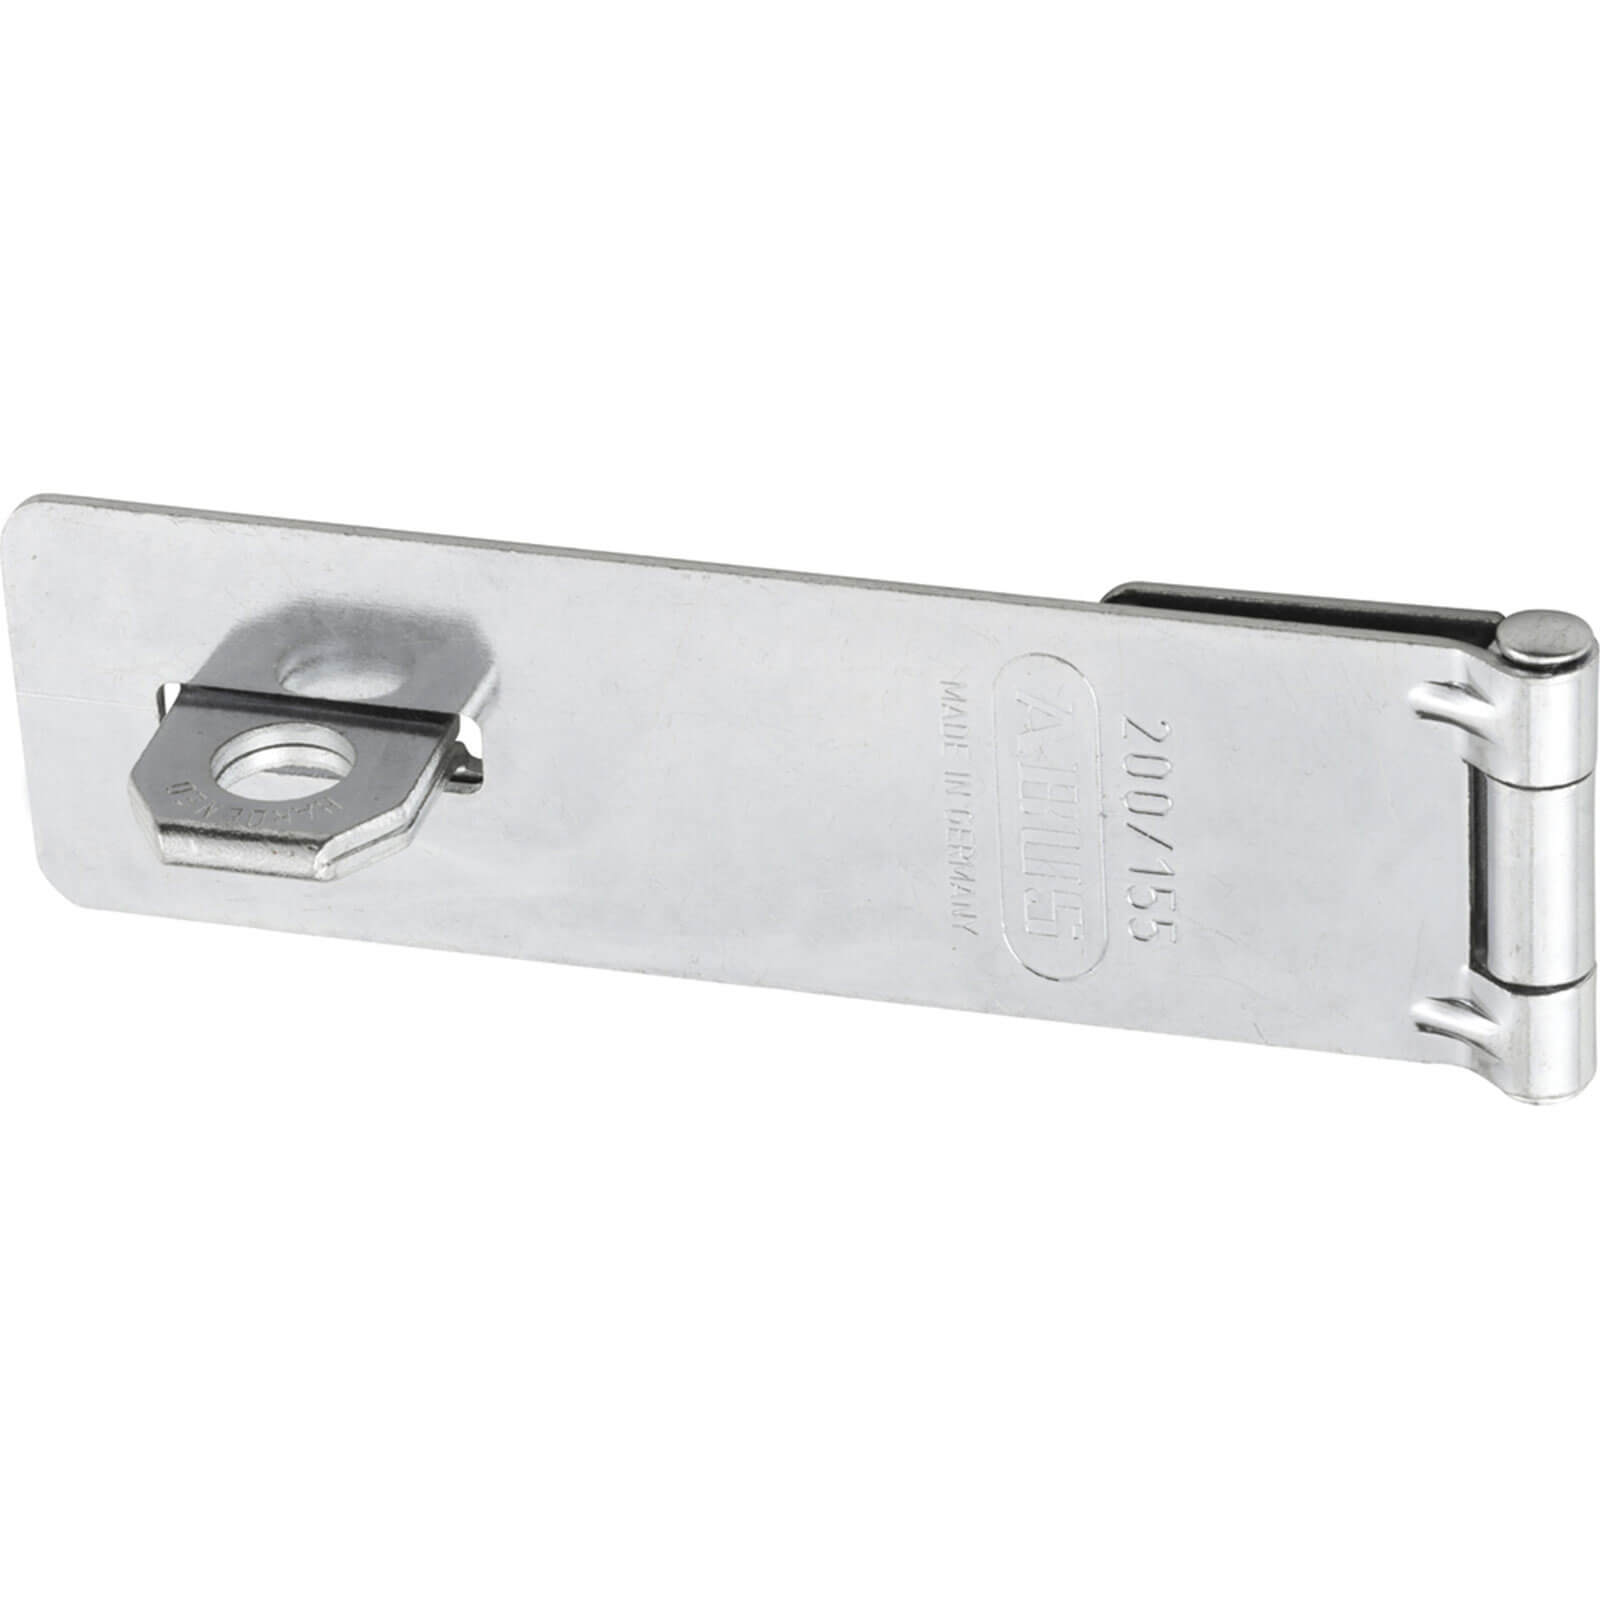 Image of Abus 200 Series Tradition Hasp and Staple 155mm